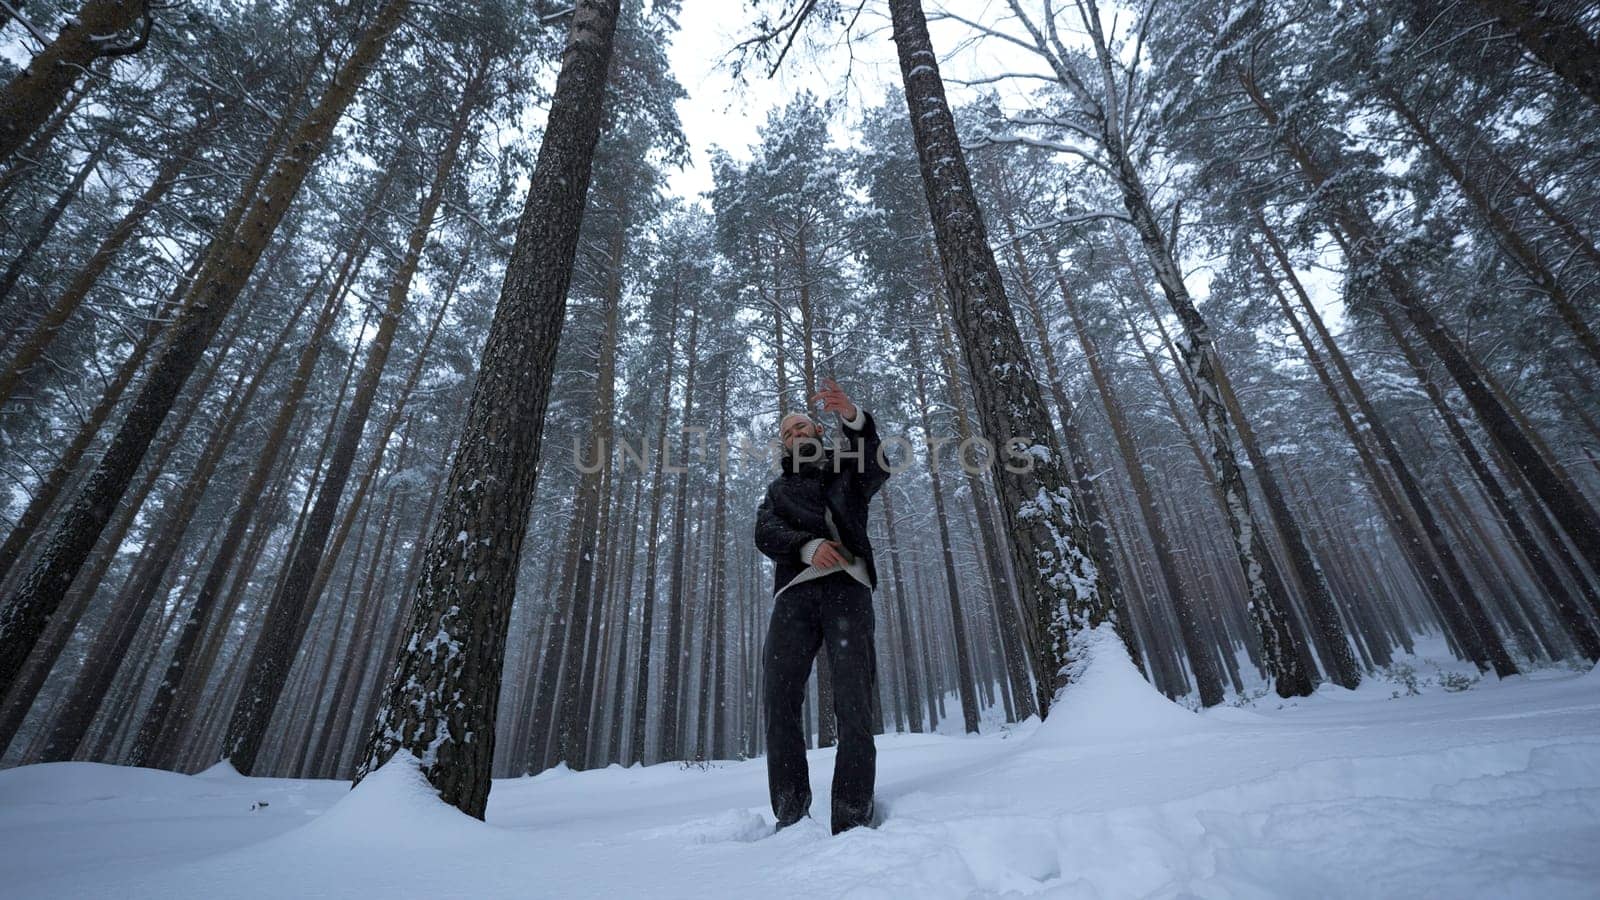 Shooting clip in winter forest. Media. Stylish man is rapping in winter forest. Man moves stylishly and raps in winter forest. Music video by Mediawhalestock